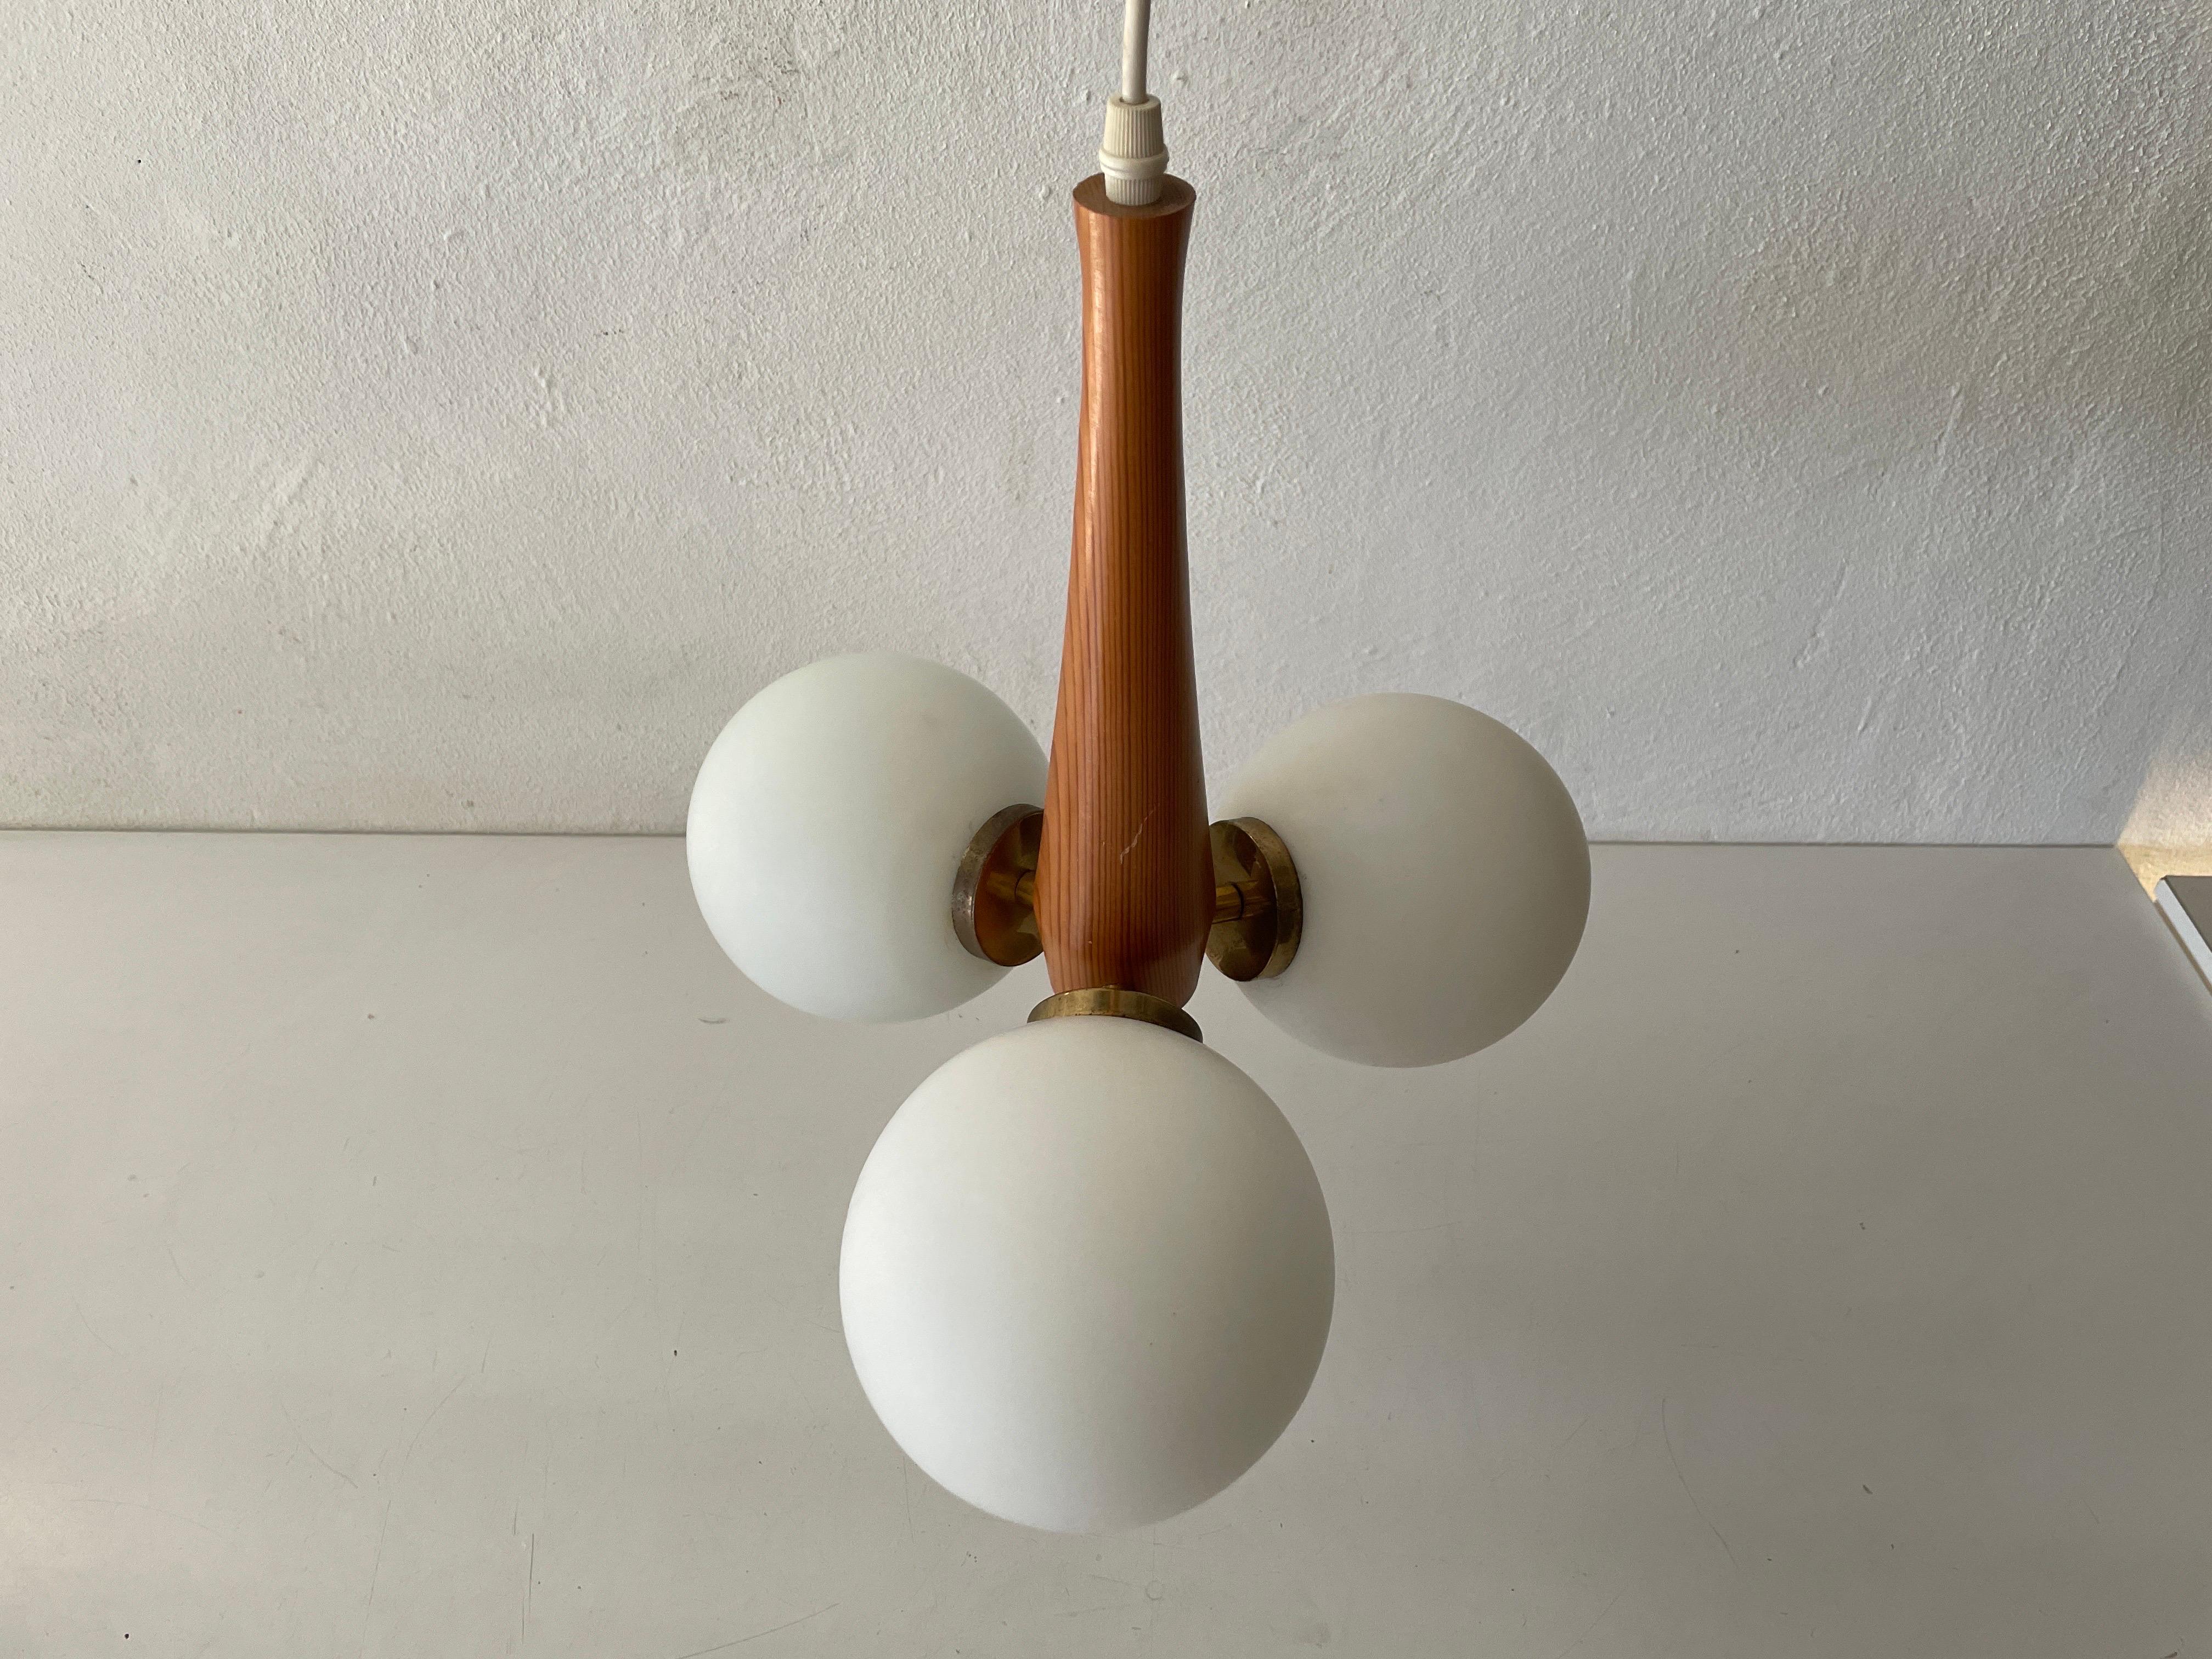 Space Age 3 Opal Ball Glass and Wood Body Atomic Ceiling Lamp, 1970s, Germany For Sale